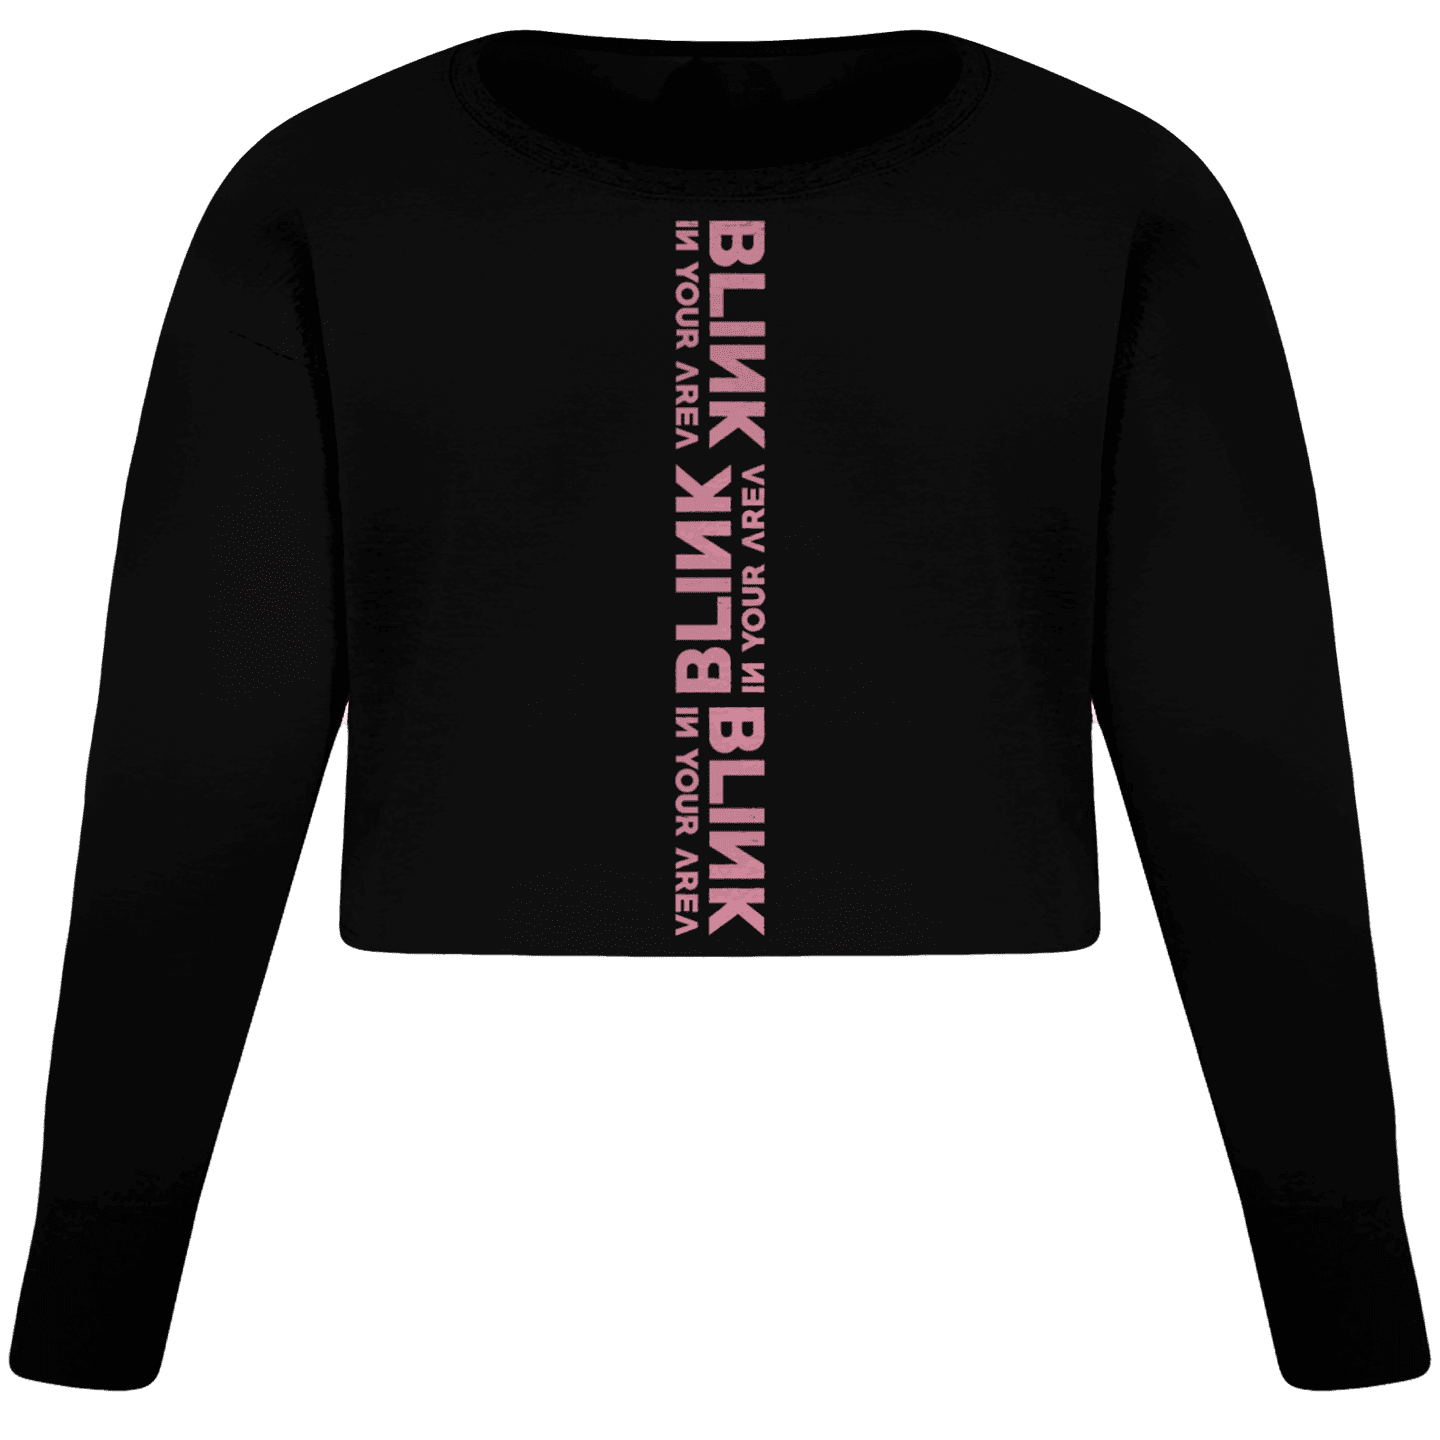 BLINK IN YOUR AREA Cropped Sweater, Black/Pink